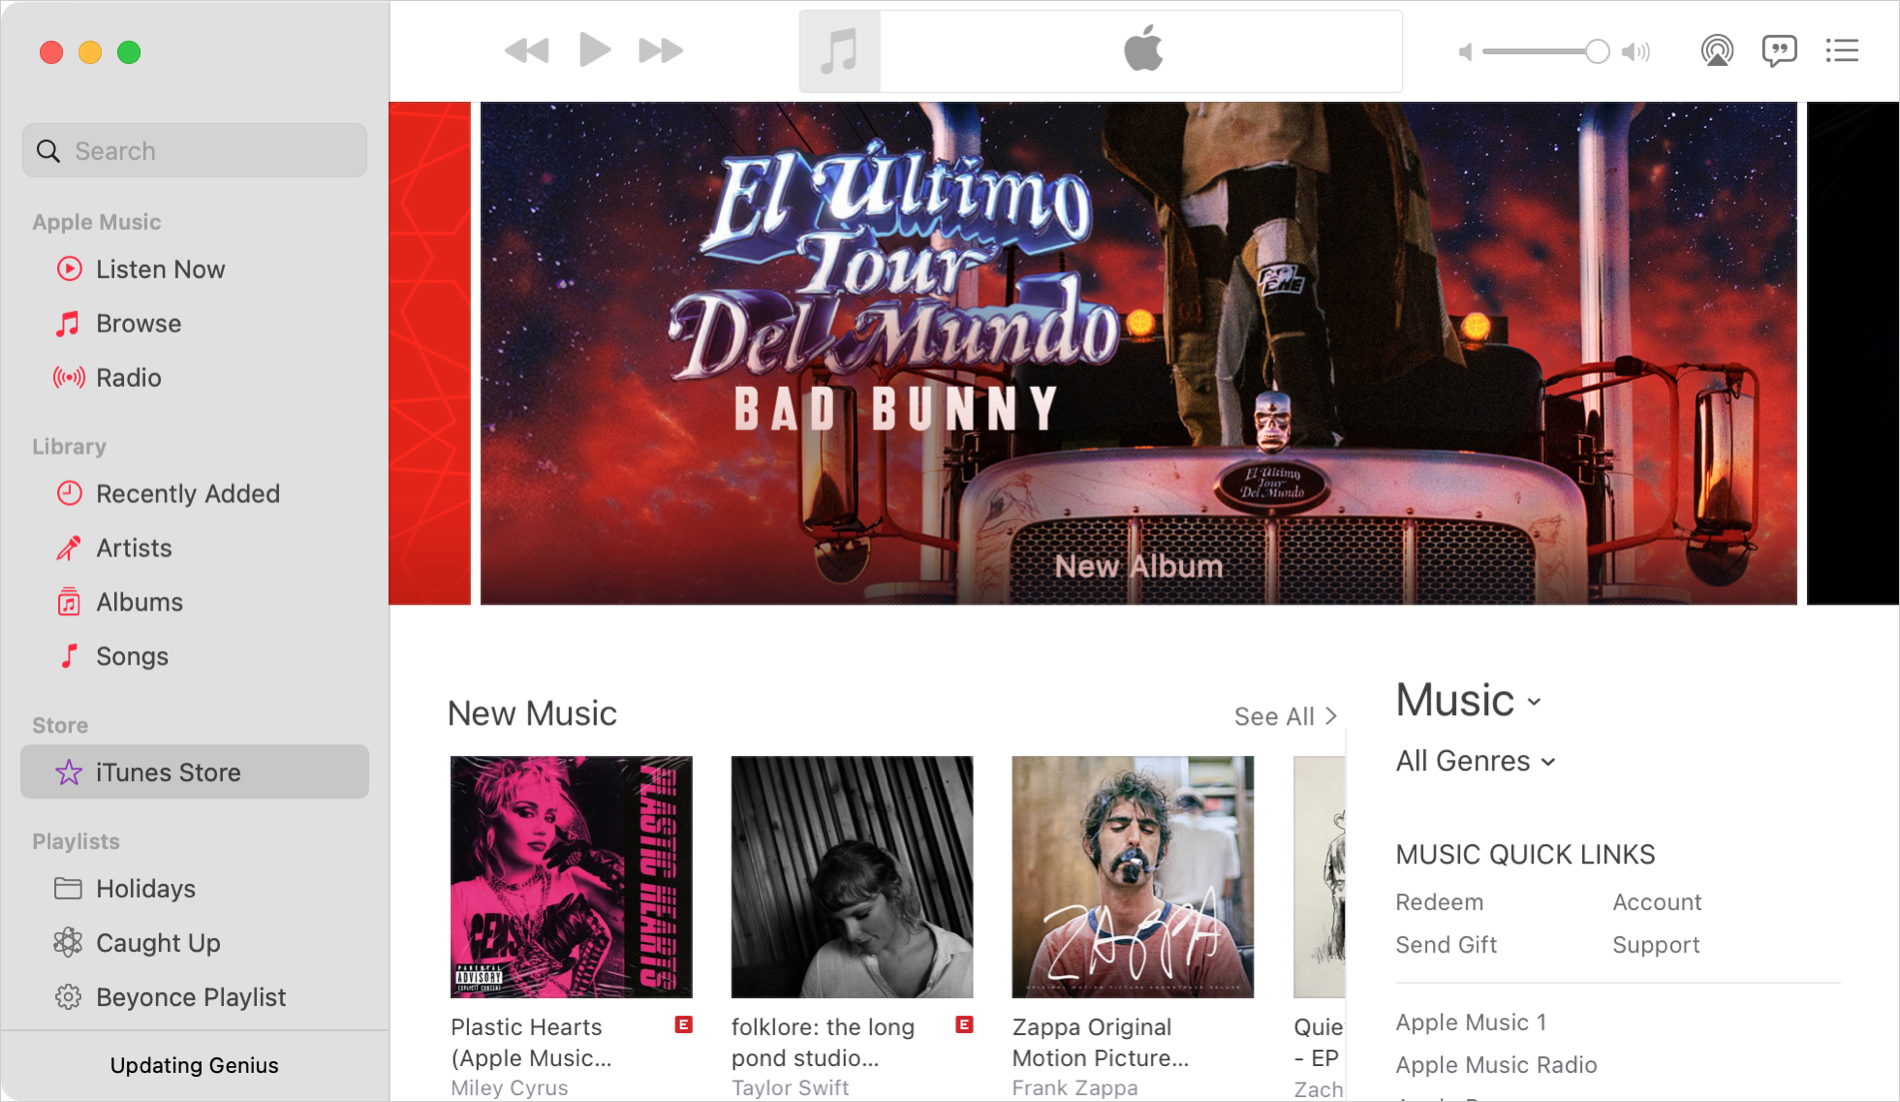 iTunes Store in Music on Mac